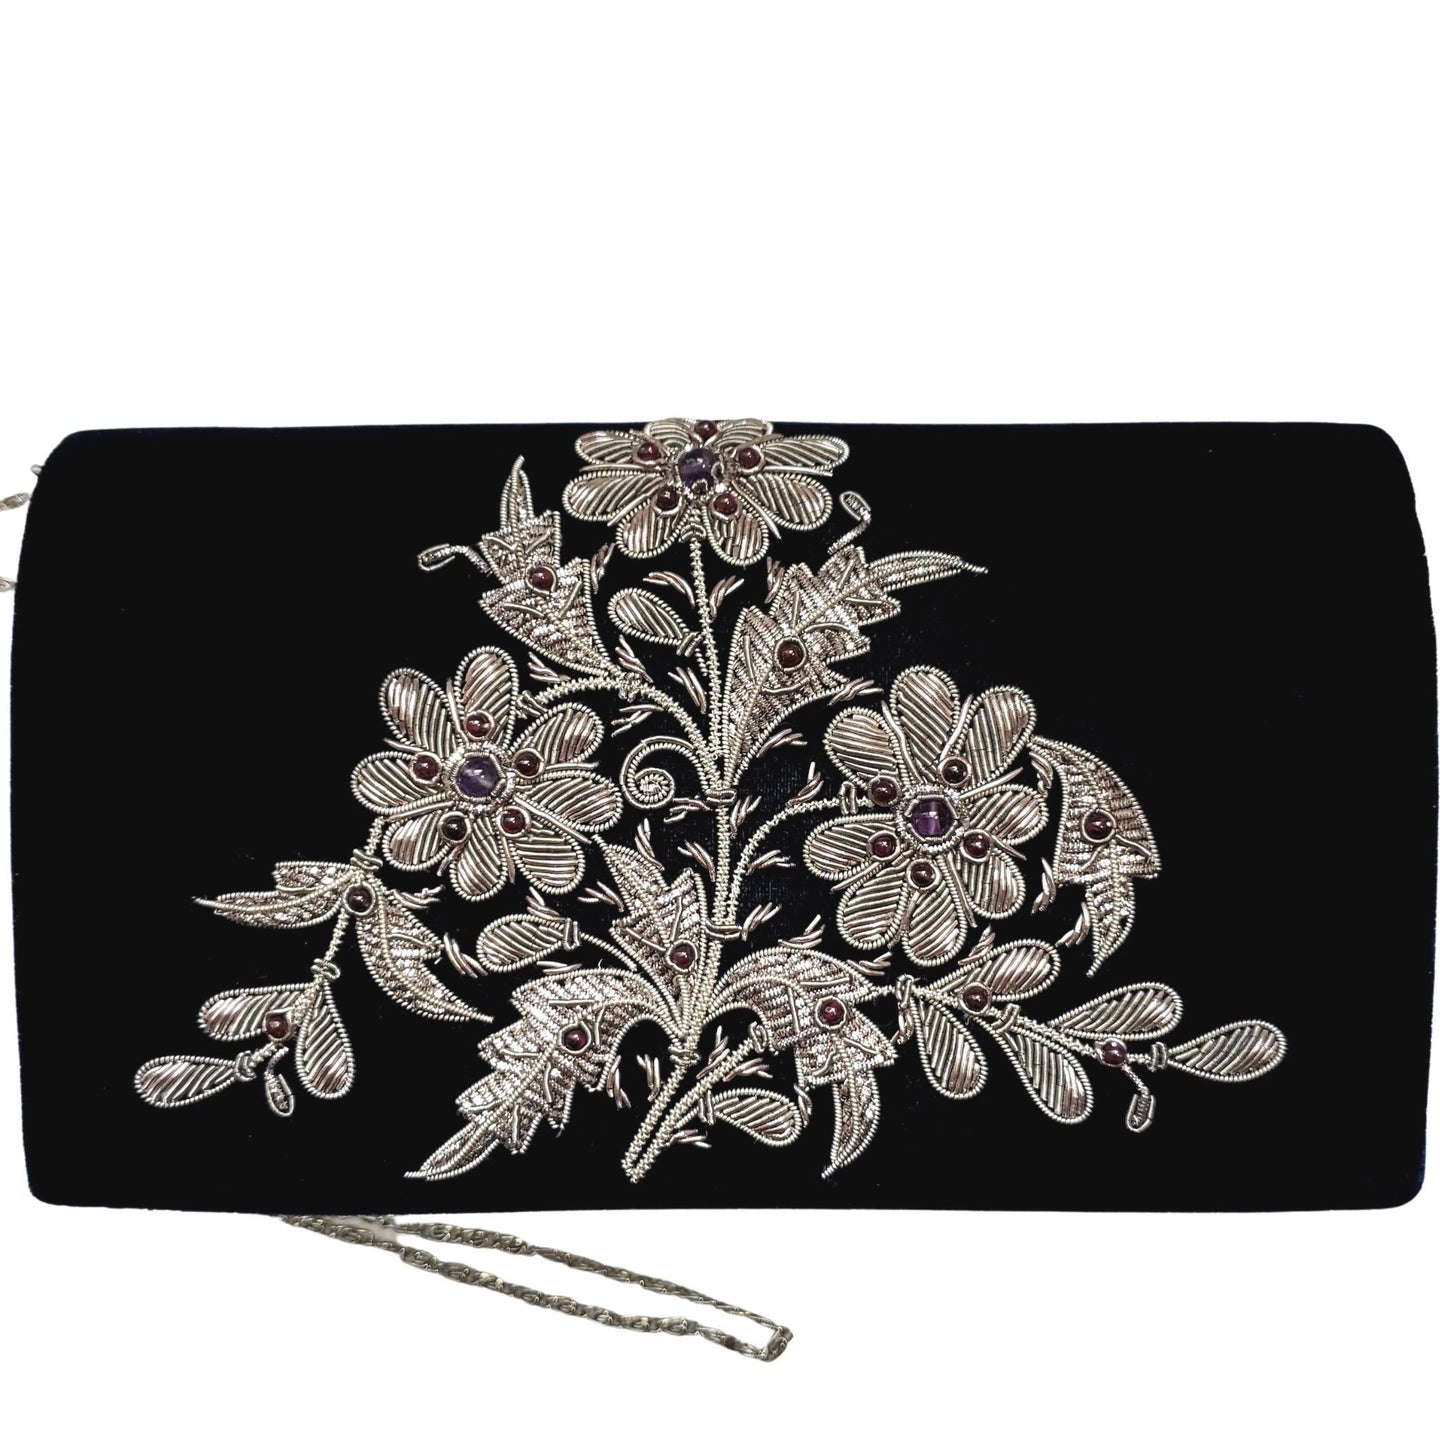 Silver flowers embroidered on navy blue velvet clutch with amethyst stones BoutiqueByMariam.